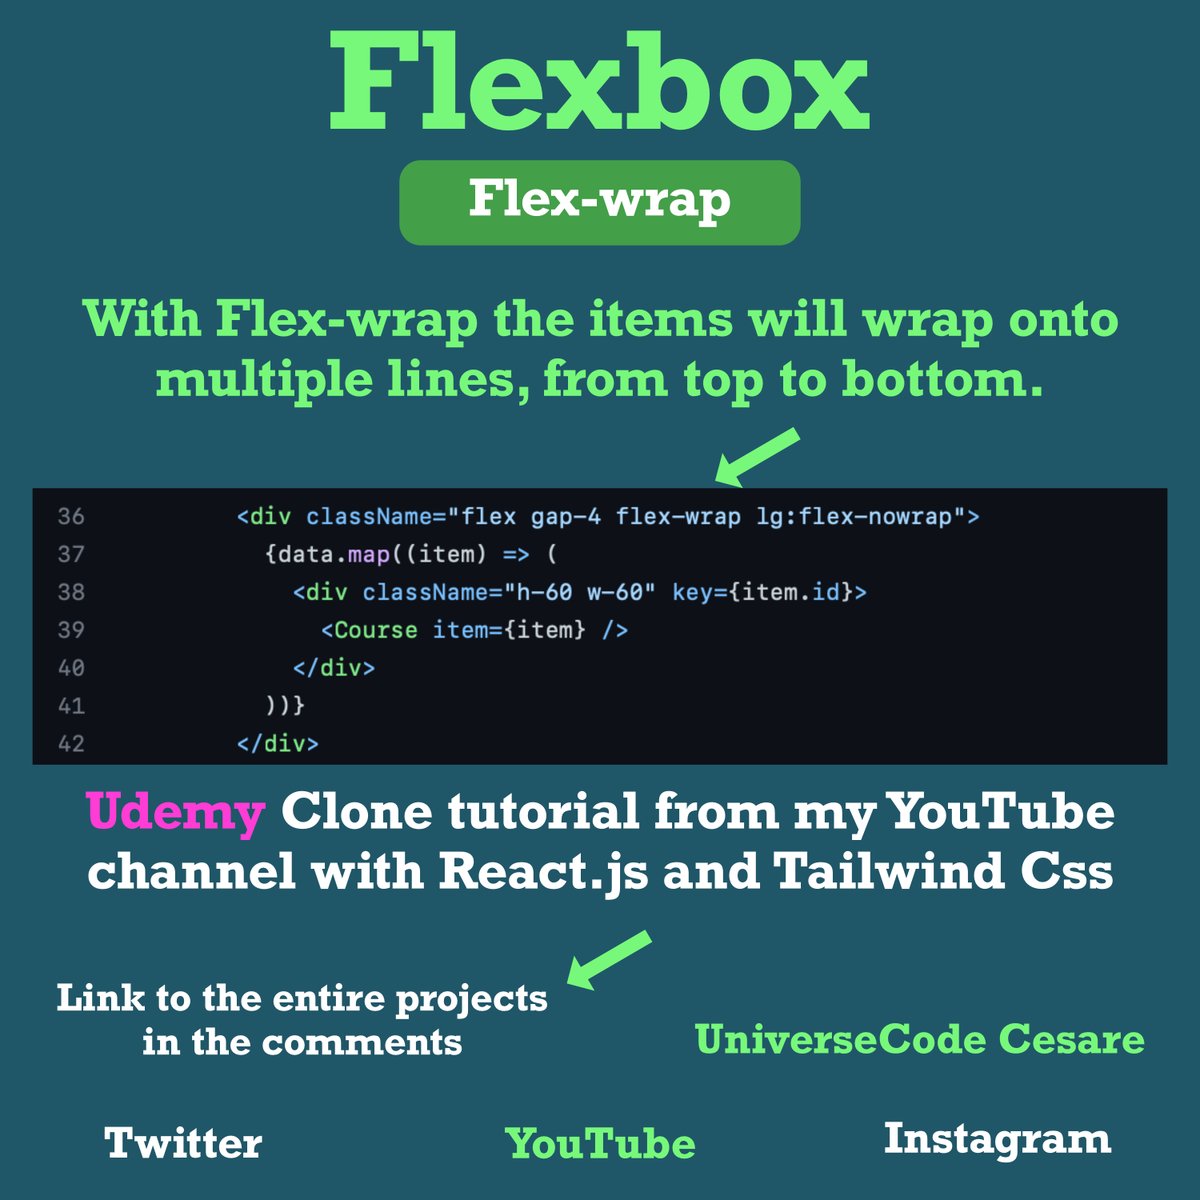 ❌ CSS Flexbox is a MUST to know for Developers.

🤔 Do you use flex-direction and flex-wrap when you are coding?